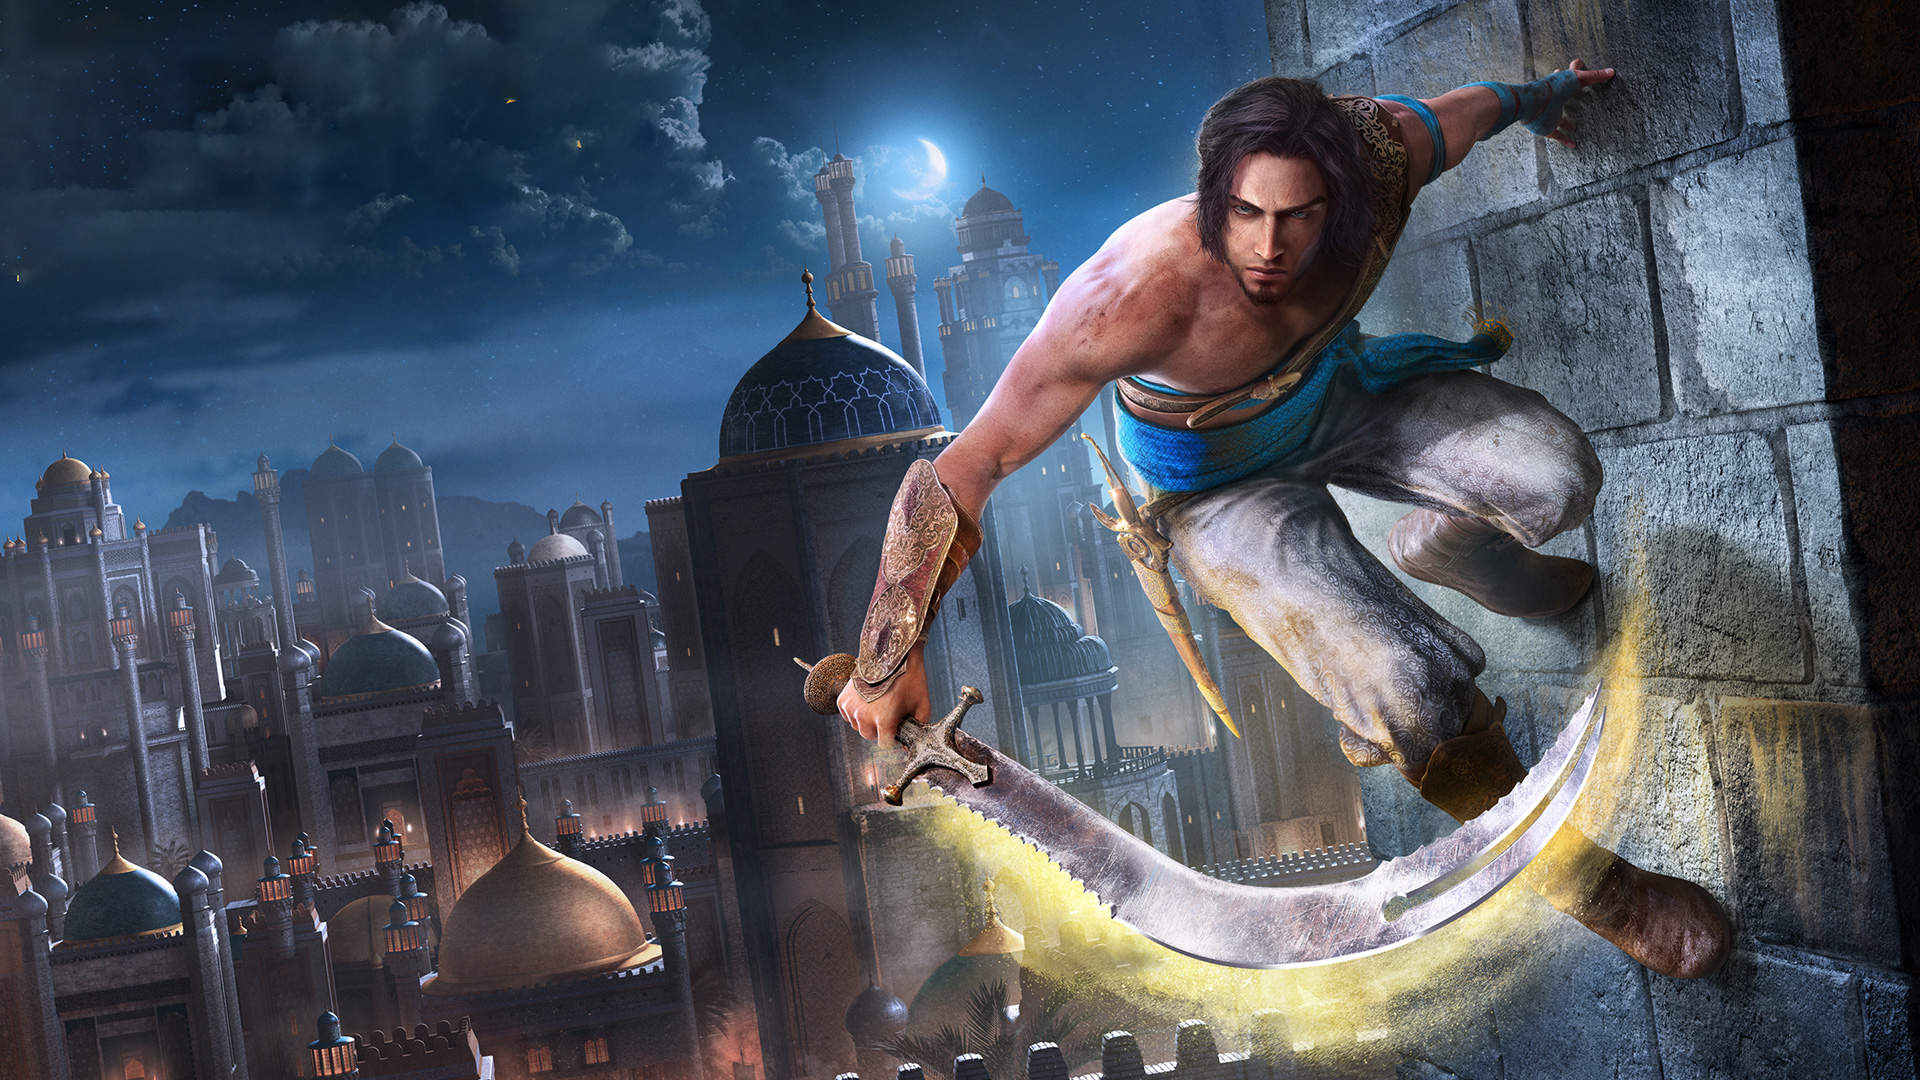 Prince Of Persia: Sands of Time Remake